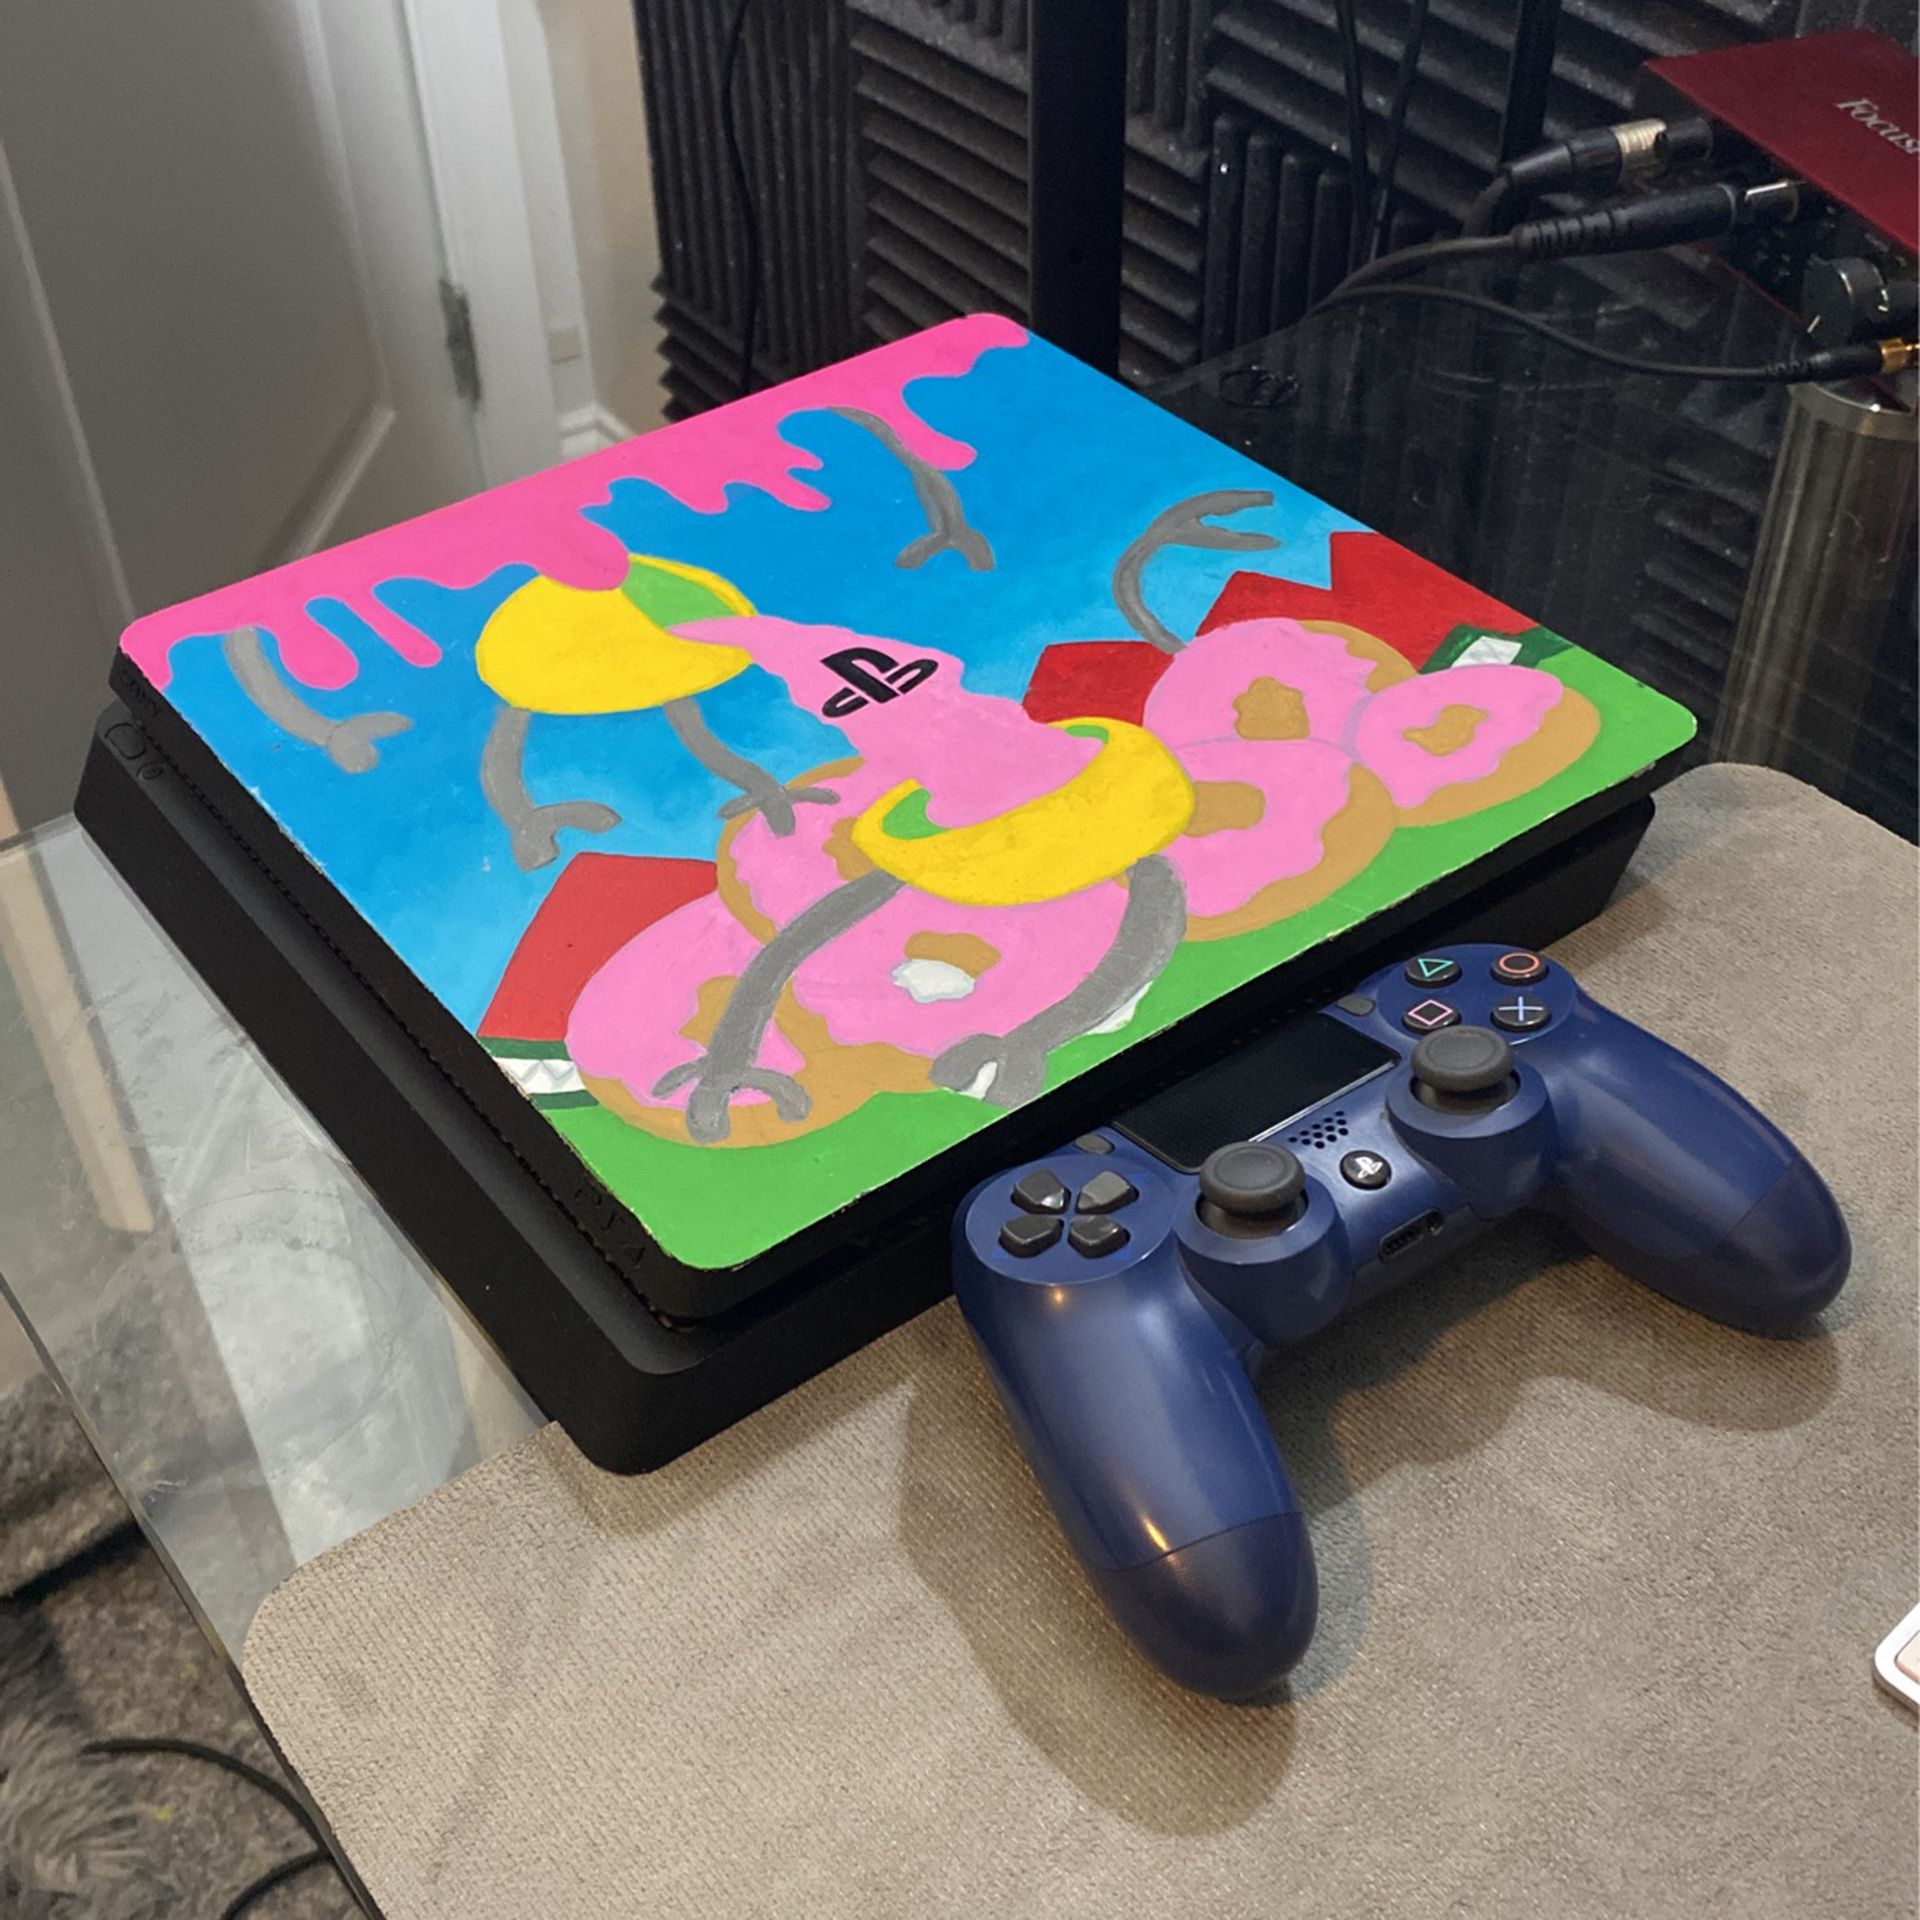 Umeki Forbyde idiom PS4 1TB w/ Navy Blue Controller, HDMI & Power Cable (Custom Painted) for  Sale in Kissimmee, FL - OfferUp